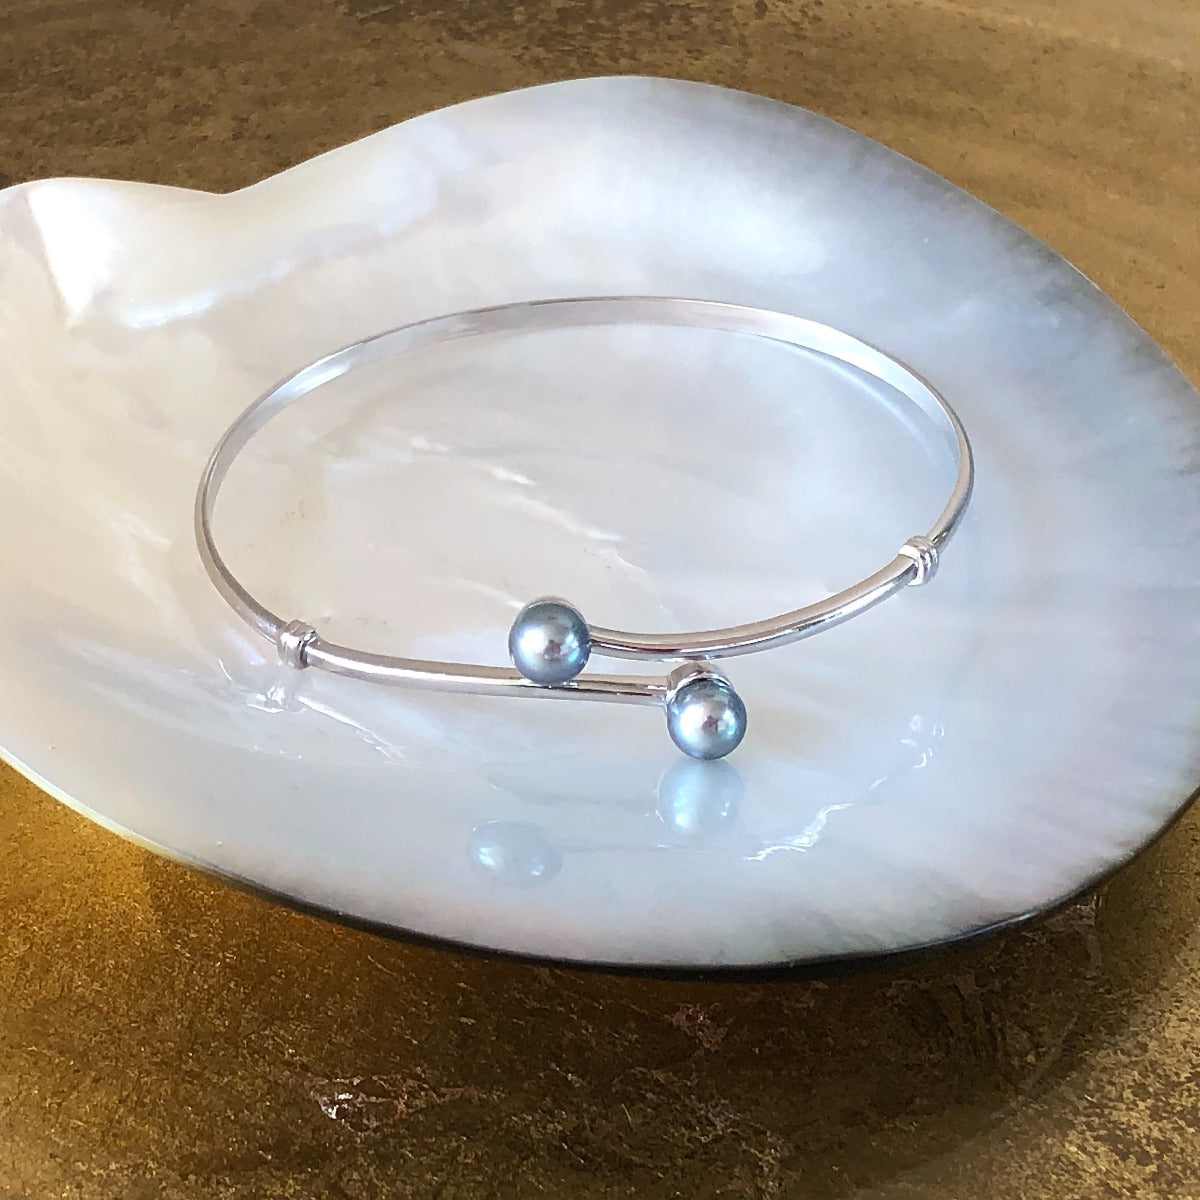 Dove Gray Pearl & Sterling Silver Bangle Bracelet  / beachlove collection by Arpaia